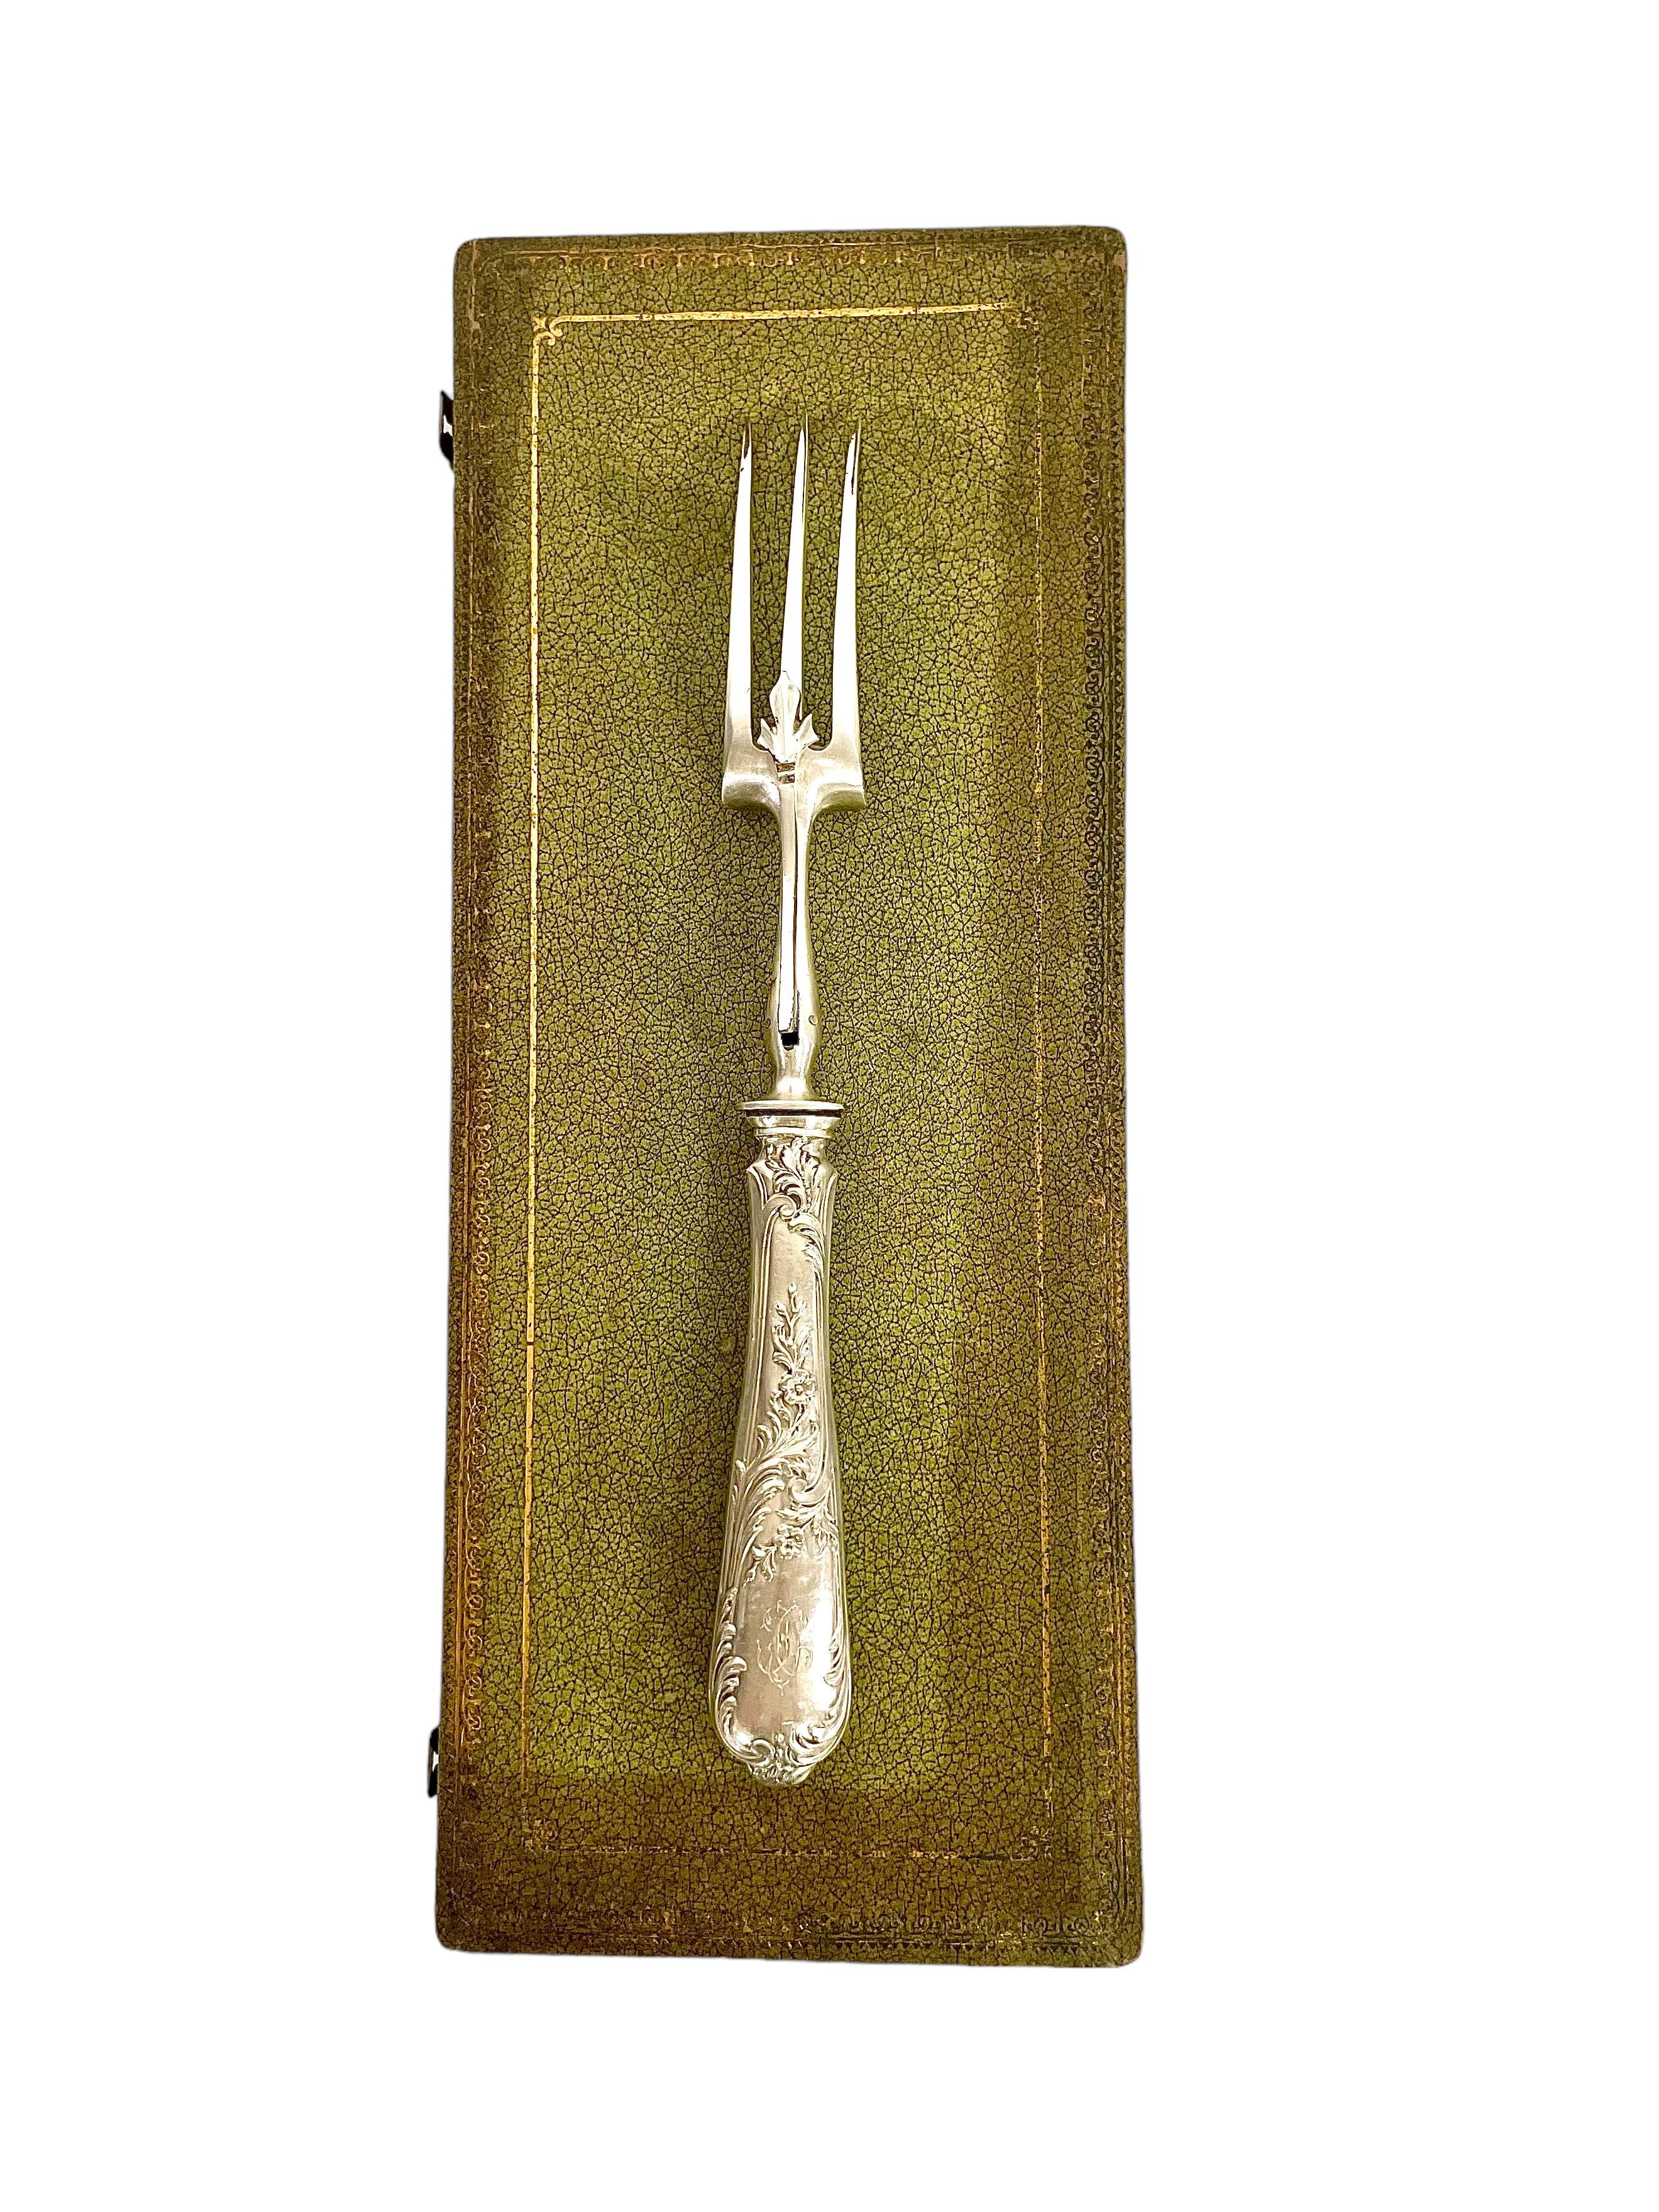 19th Century French Louis XIV Style Gigot Lamb Silver Plated Carving Set For Sale 7